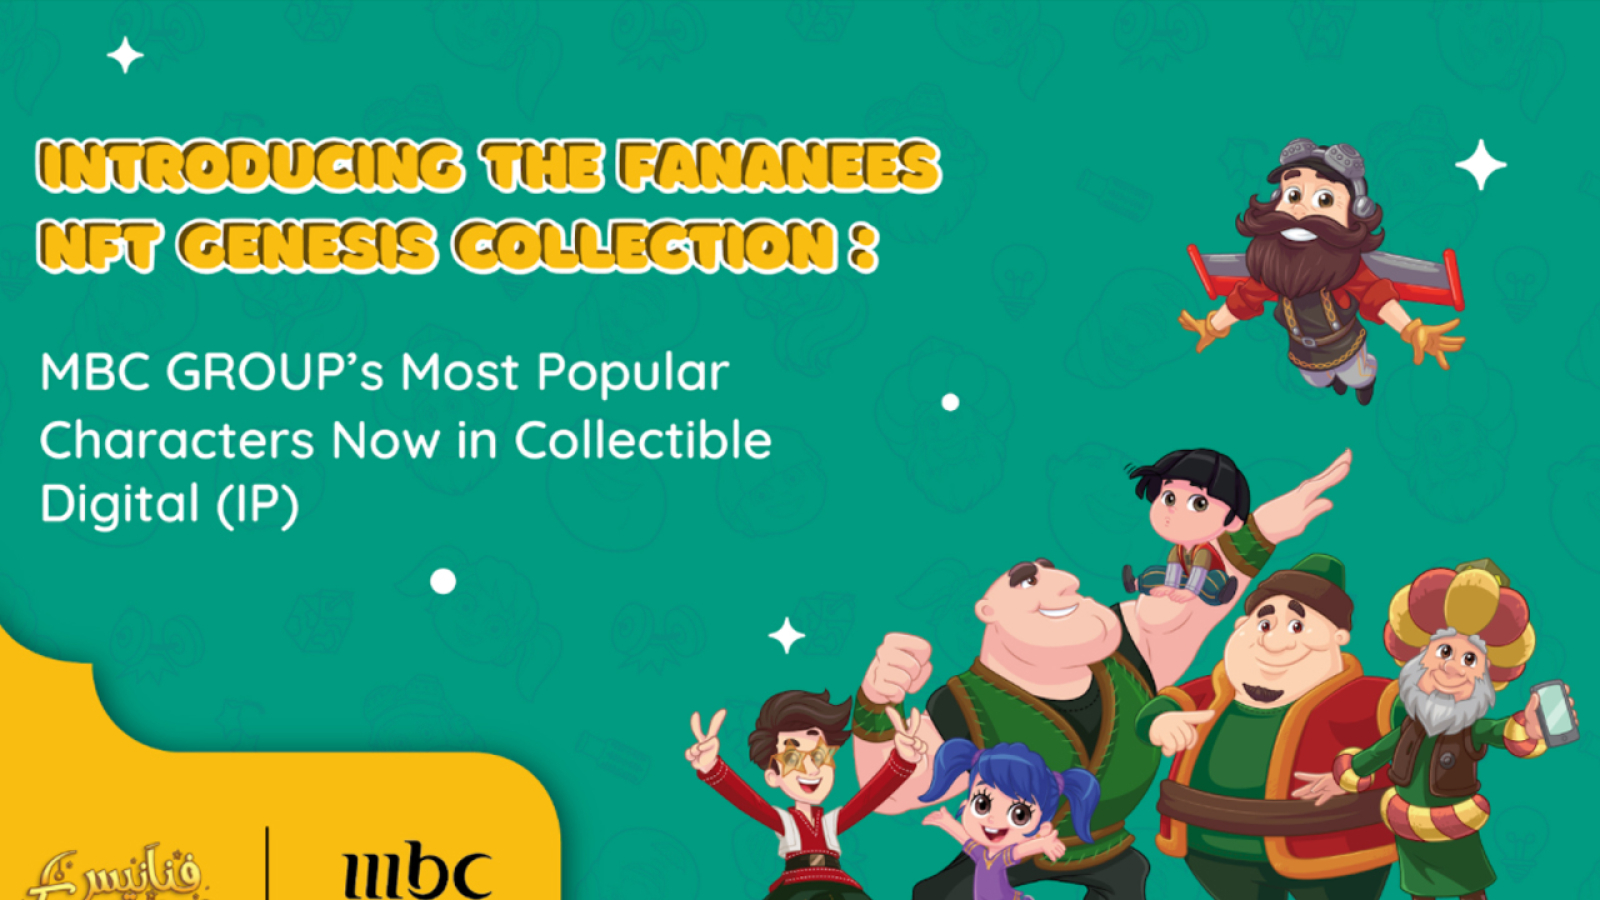 MBC GROUP's Most Popular Characters are now Available via the Fananees NFT Genesis Collection